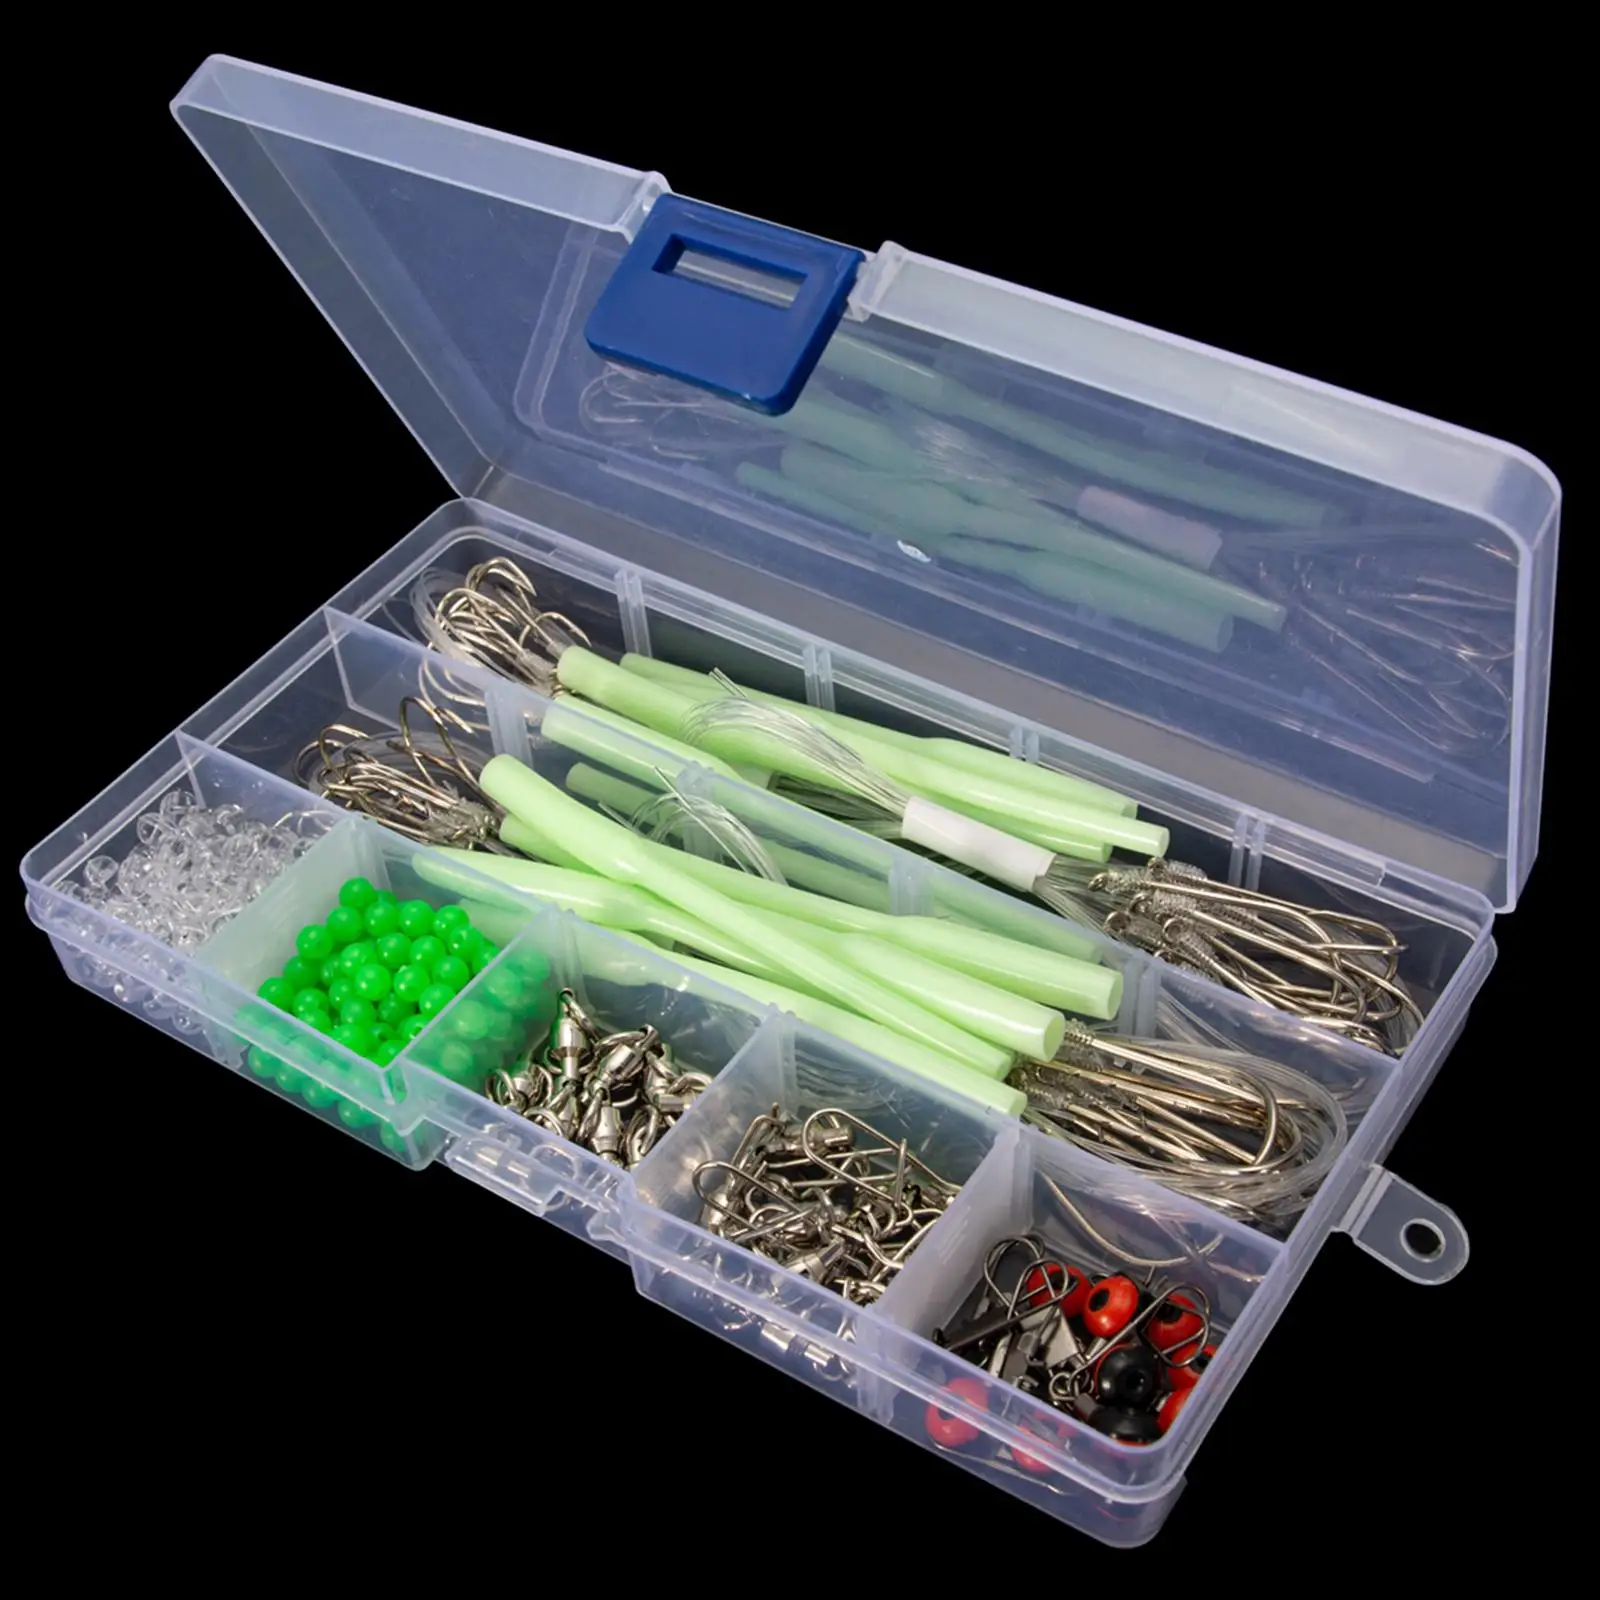 289Pcs Portable Fishing Tackle Box Thread Hook Set Storage Case Carp Fishing Gear Tool Beads Fishing Accessories for Beginners